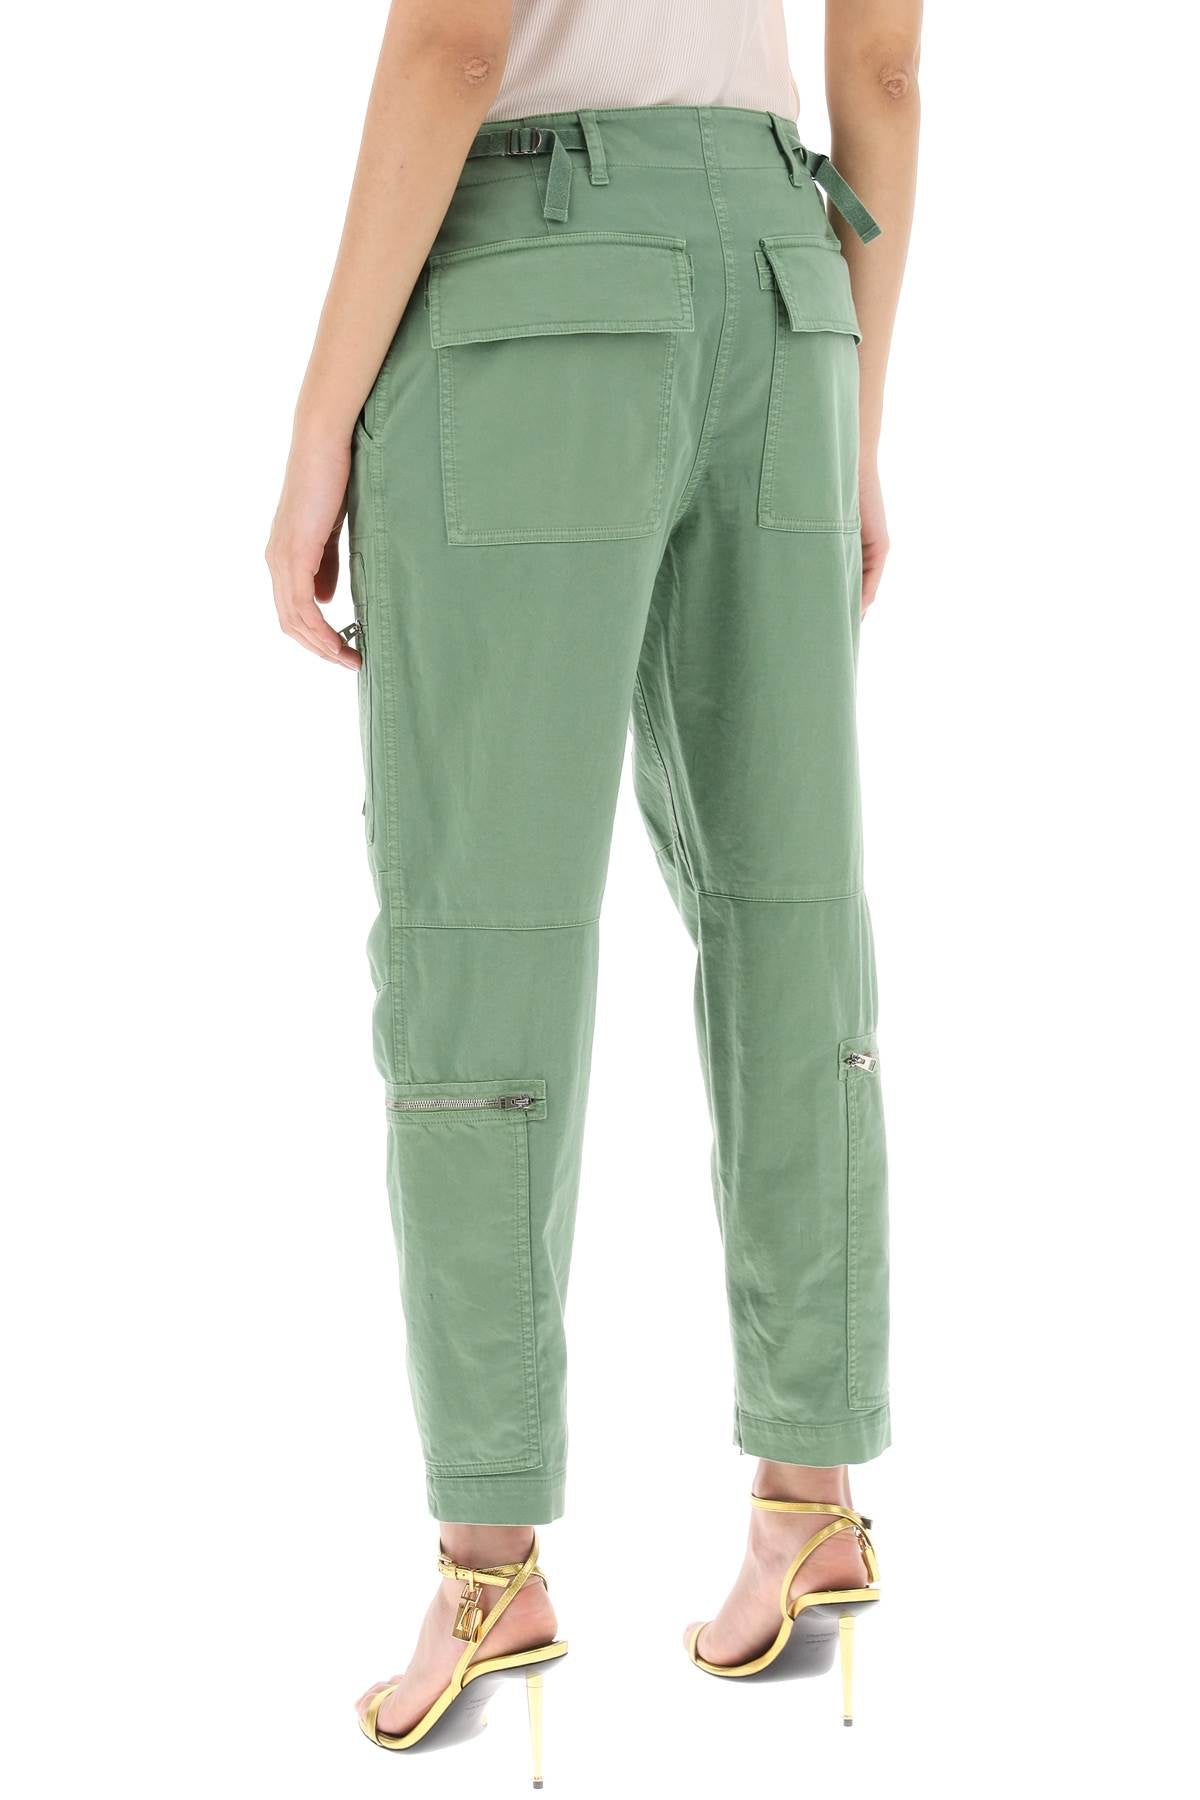 Tom ford stretch cotton twill cargo pants-2